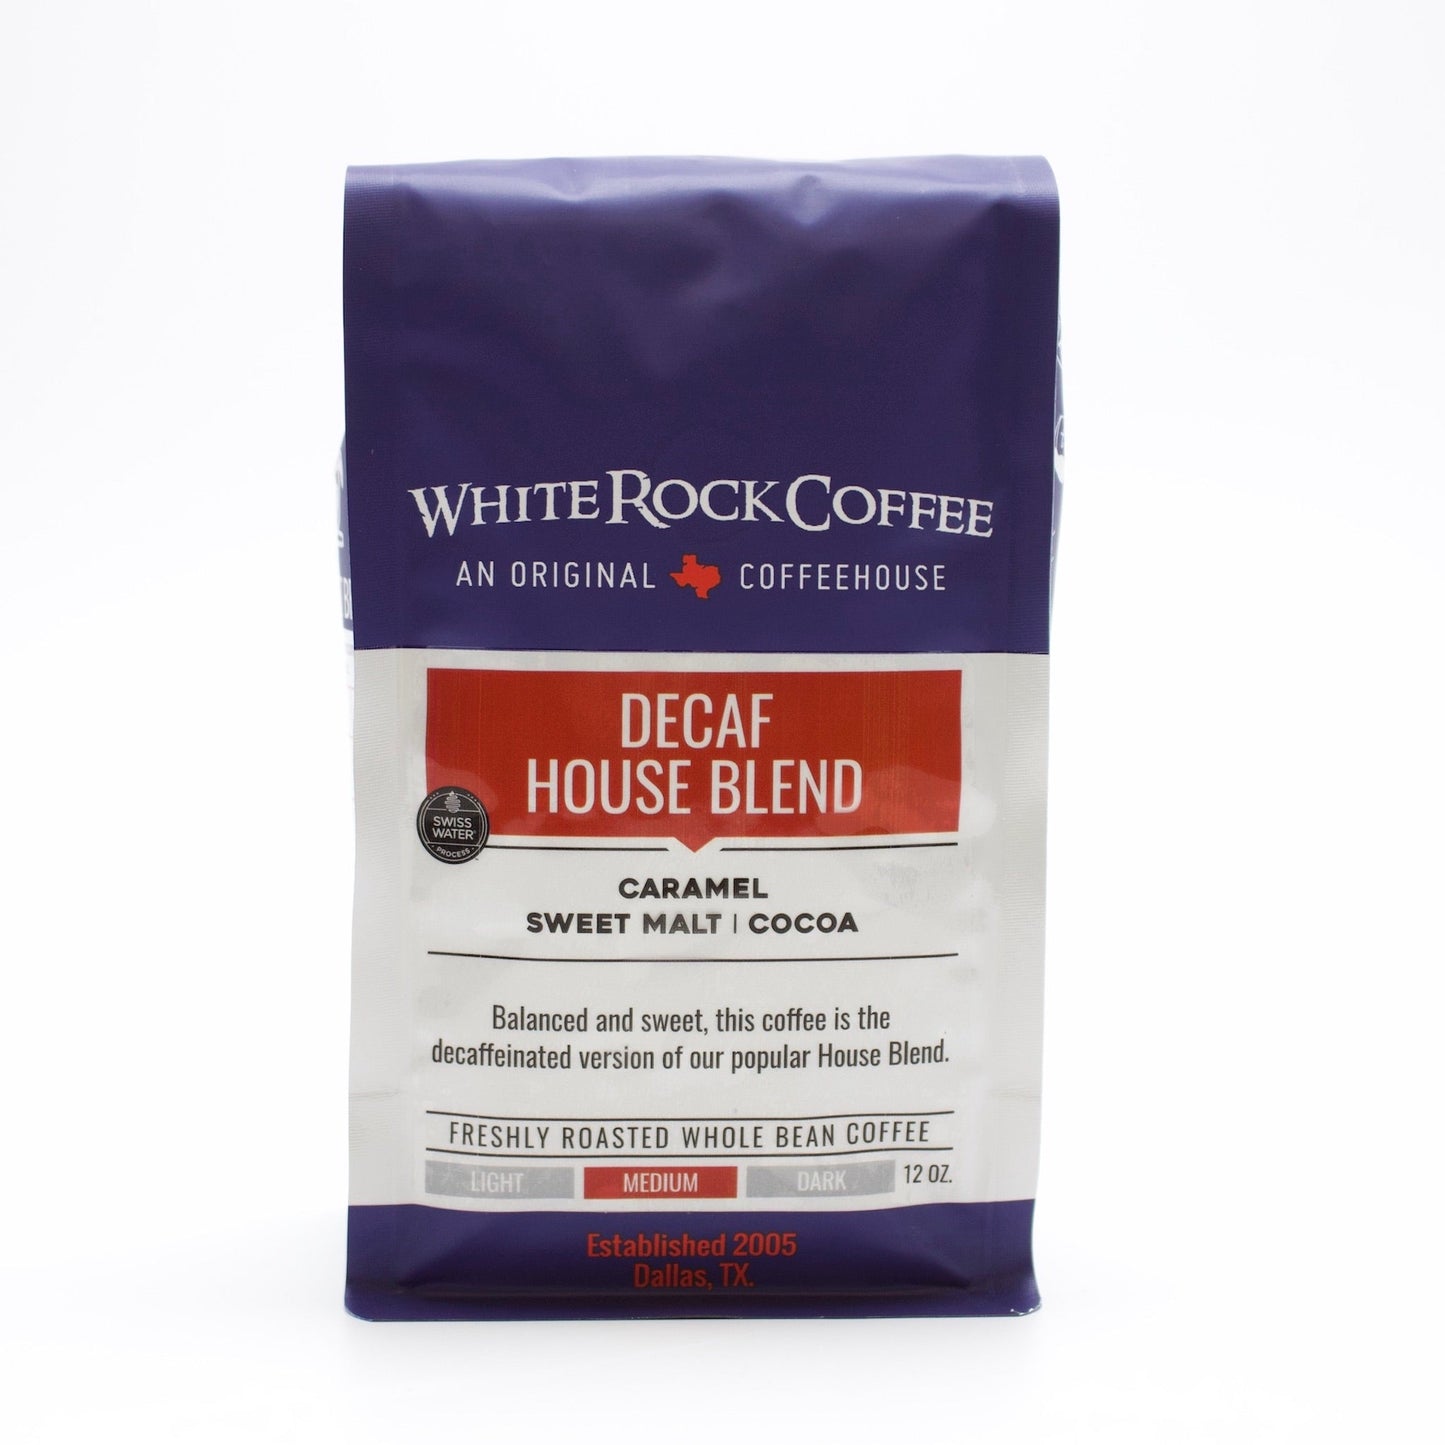 3 Month Coffee Gift Subscription - Decaf House Blend - White Rock Coffee